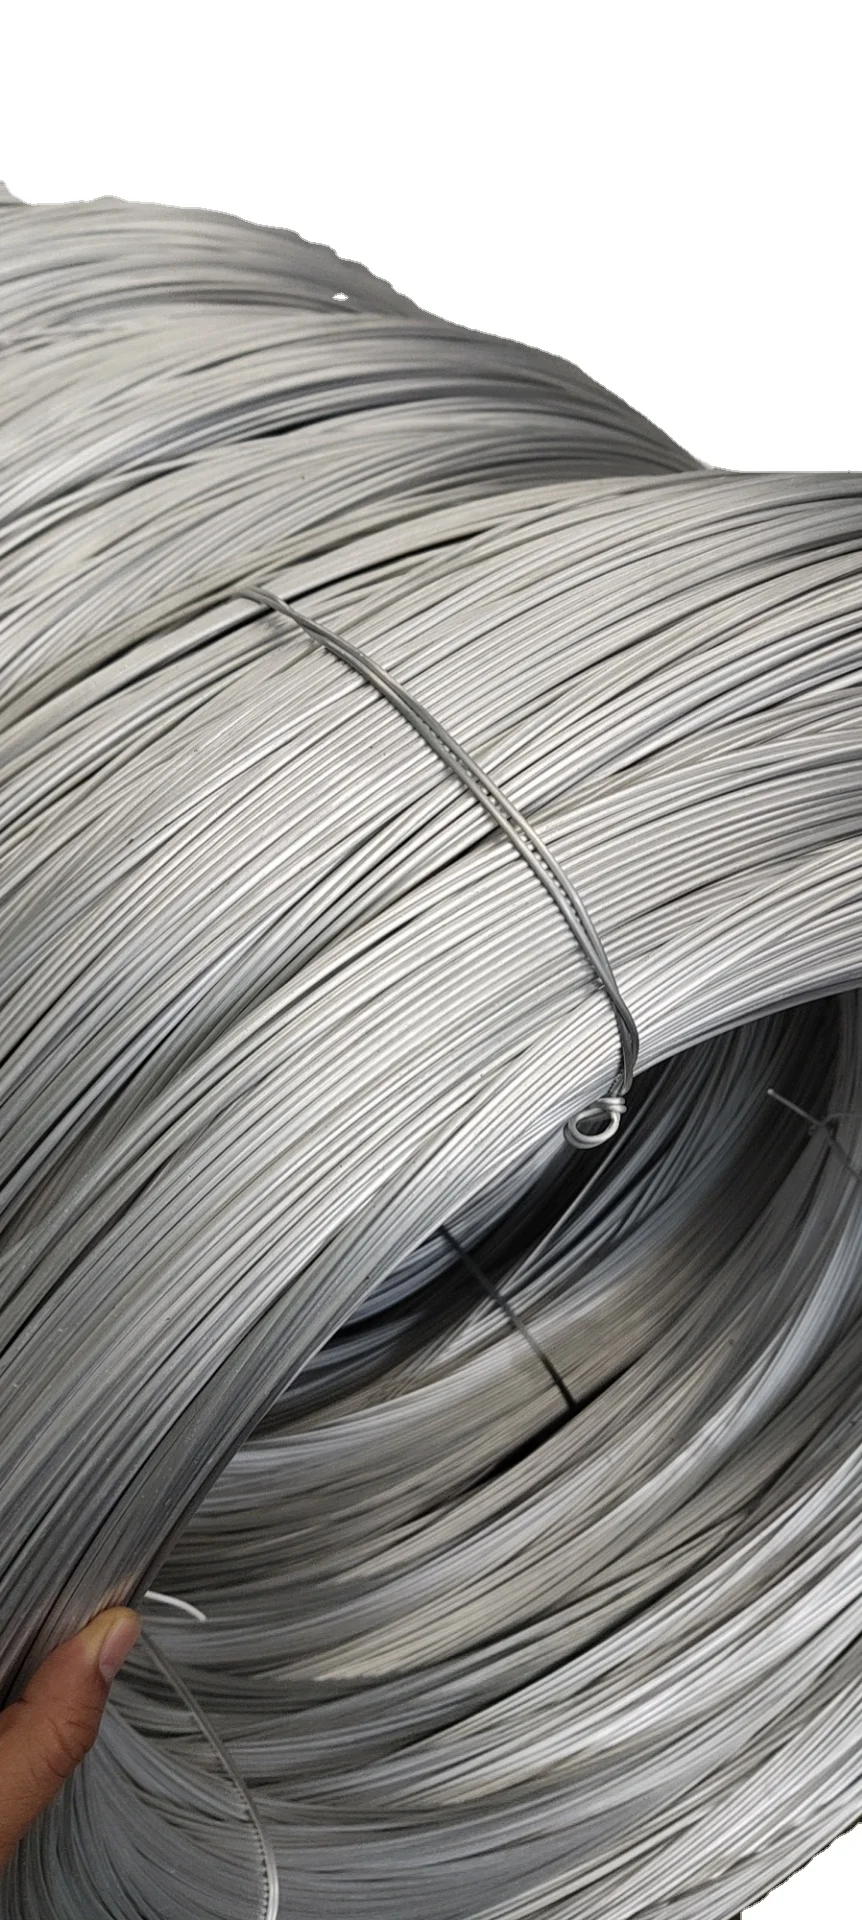 SUPPLIER HIGH QUALITY ER 5052  ALUMINUM ALLOY WIRE FOR MAKING RIVETS /  NAILS